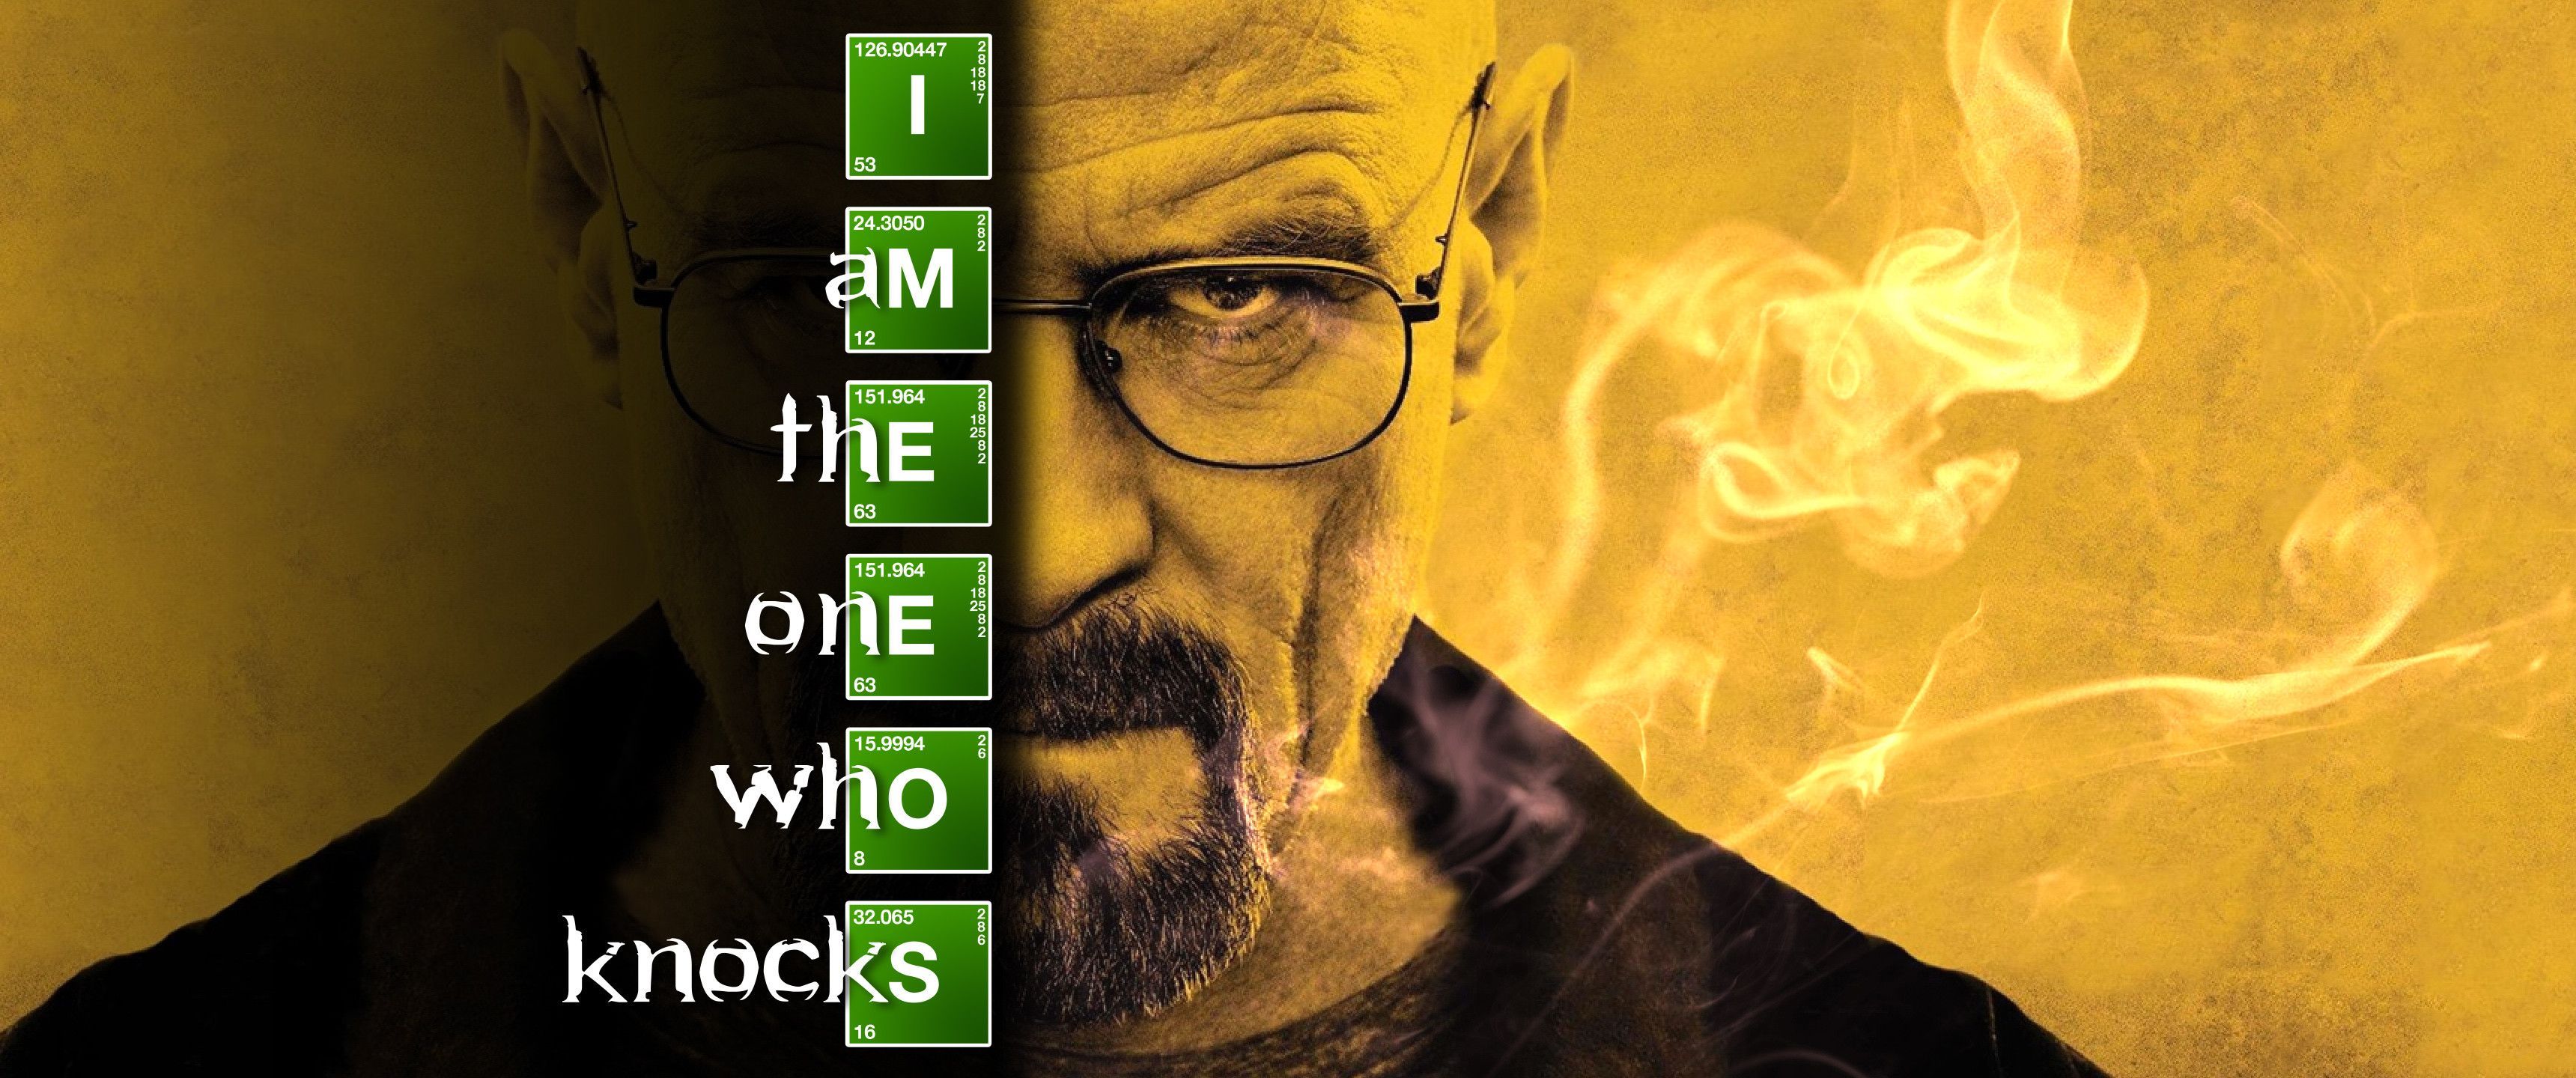 Breaking Bad Wallpapers HD High Quality 